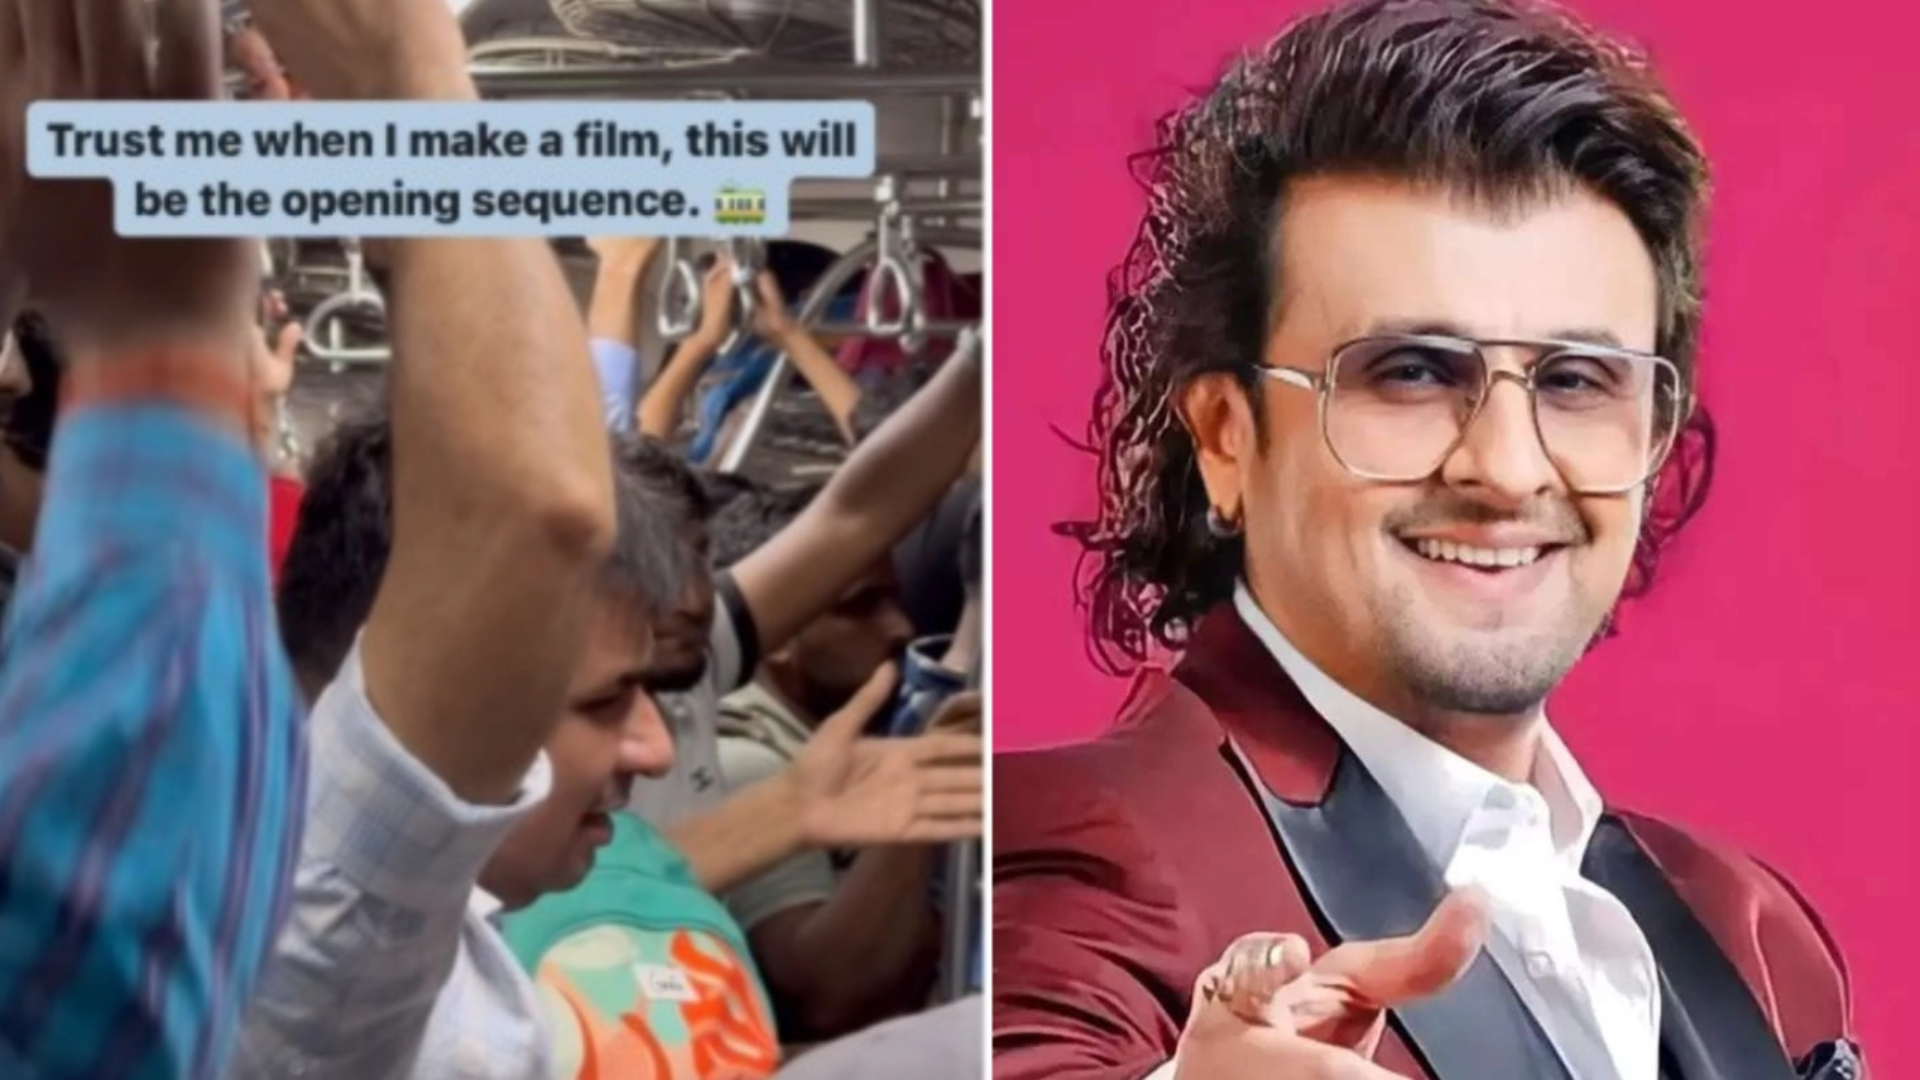 Train Performance of Sonu Nigam’s ‘Yeh Dil Deewana’ Captivates Internet; Video Goes Viral